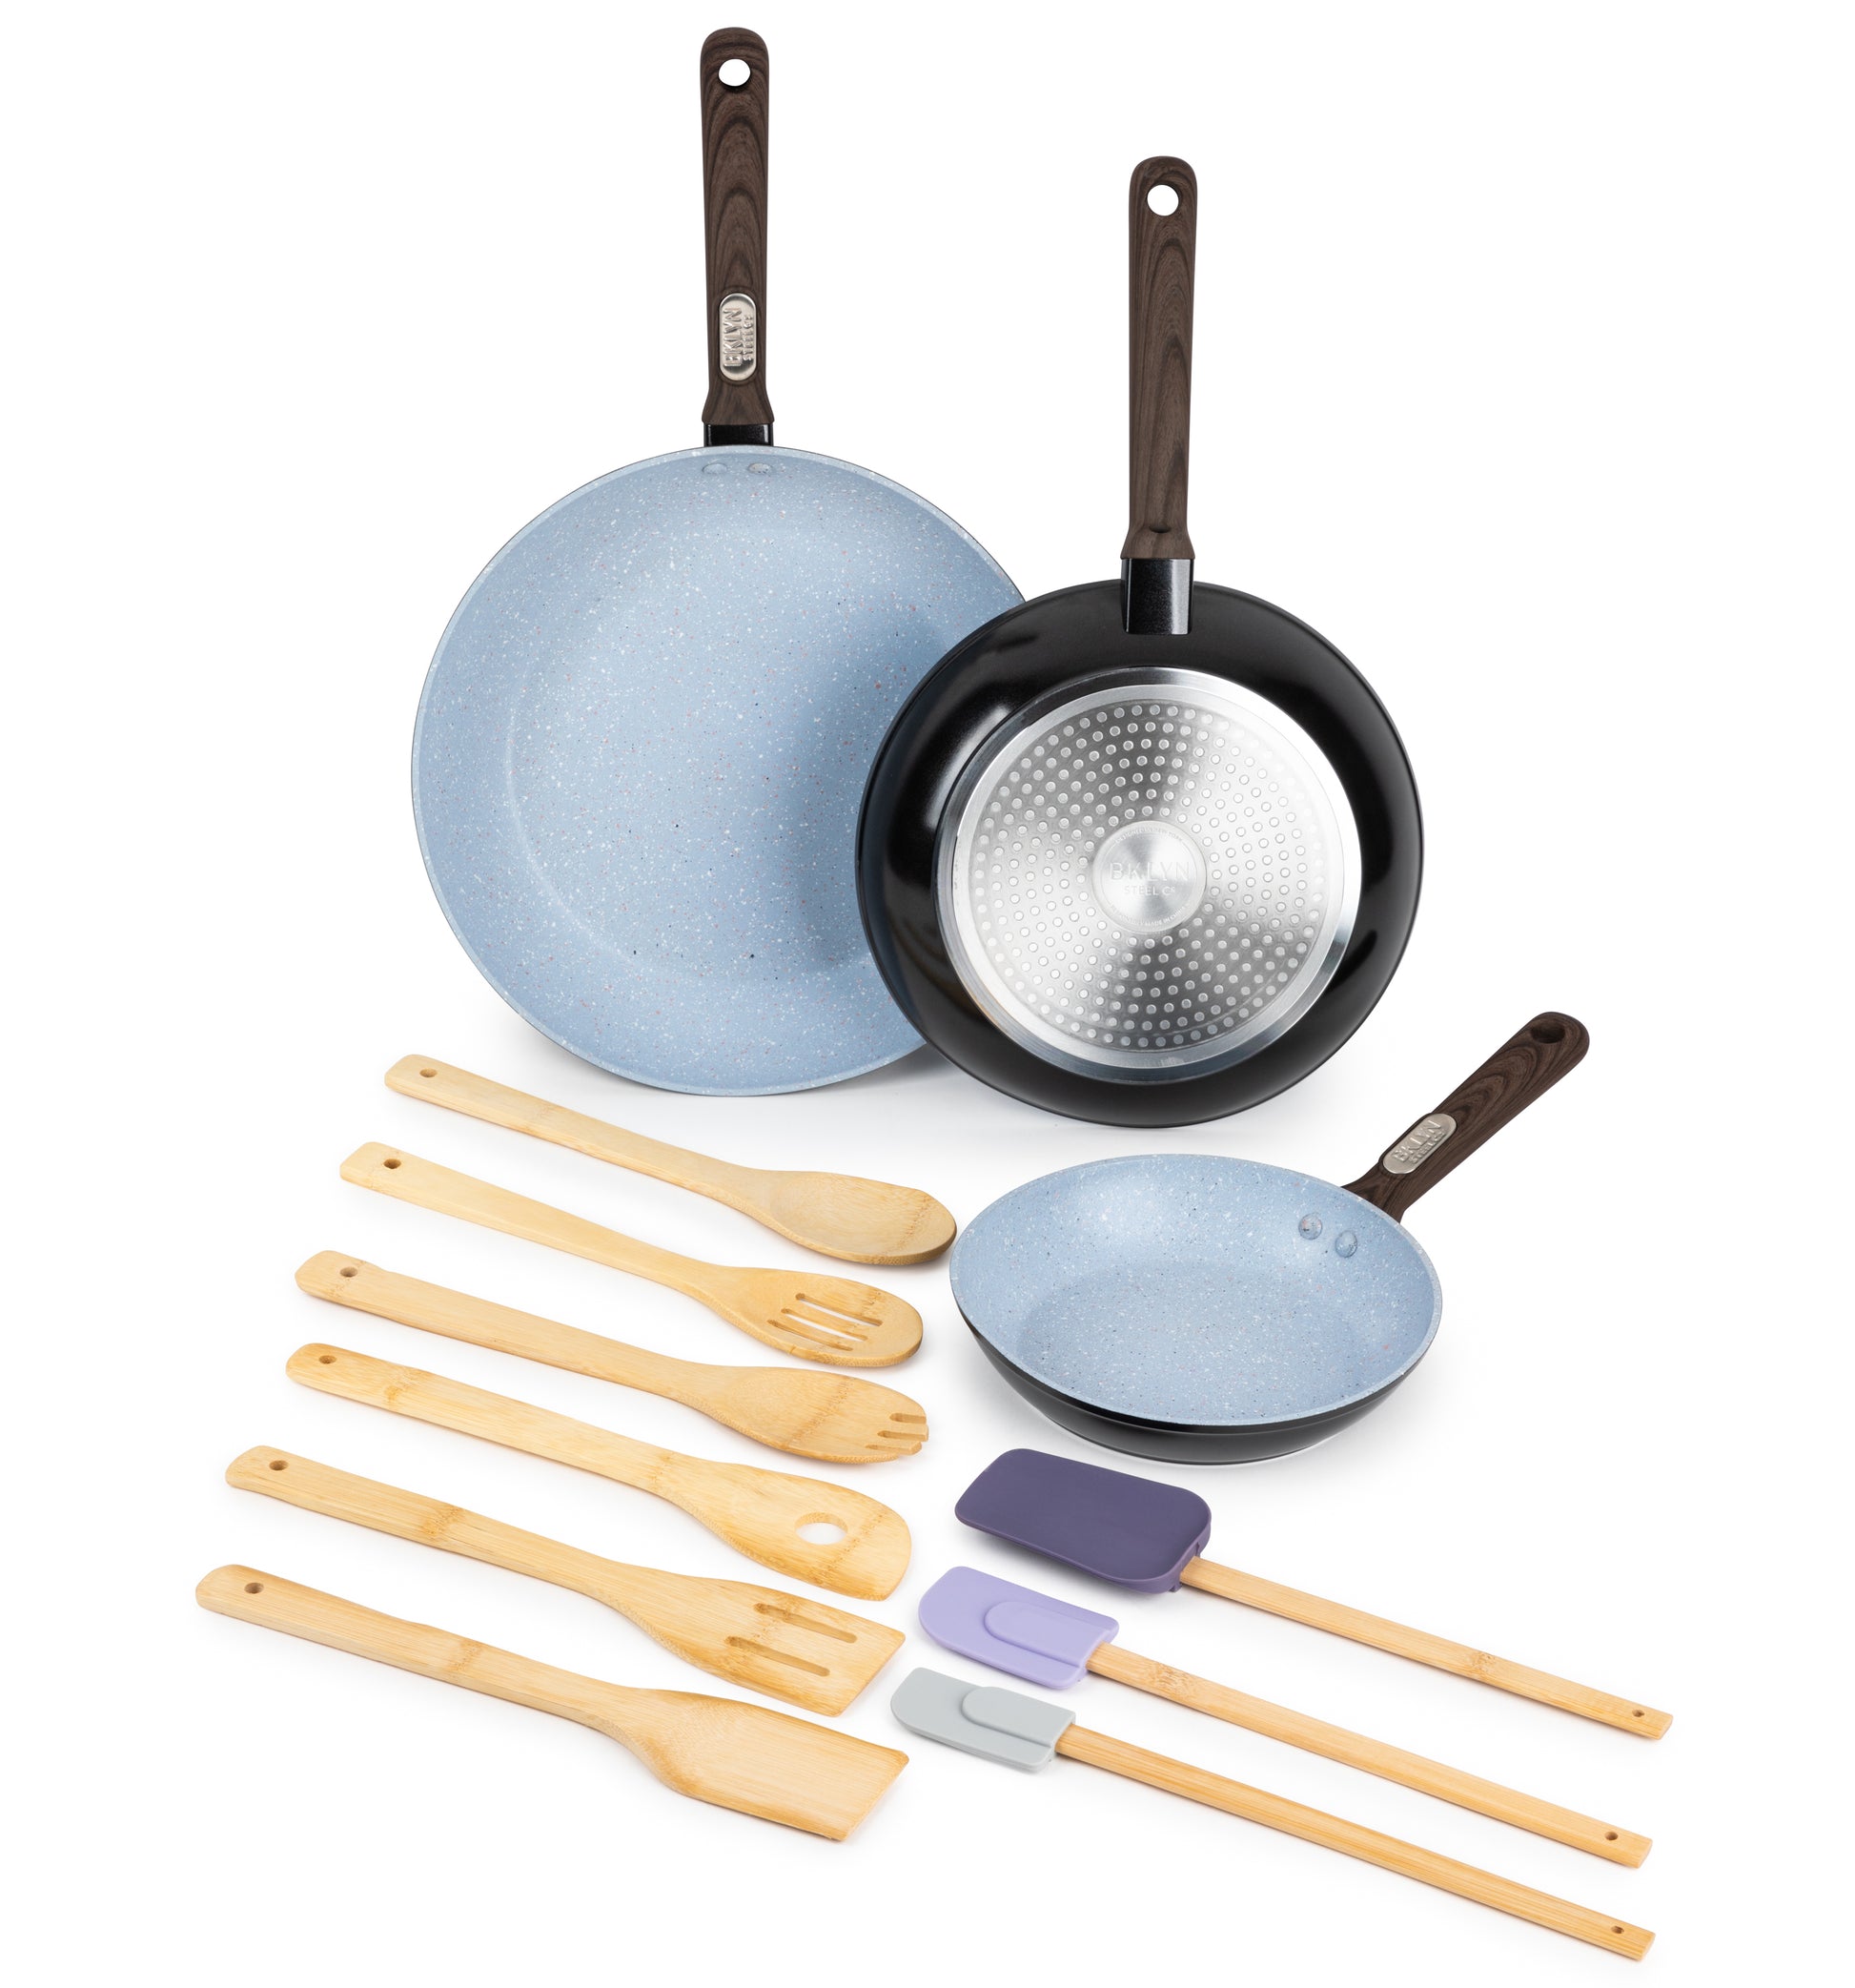 8", 10" and 12" blue frying pans and 9 utensils: spork, slotted spoon, spoon, wood spatula, slotted spatula, risotto spoon, large, medium and small silicone spatulas